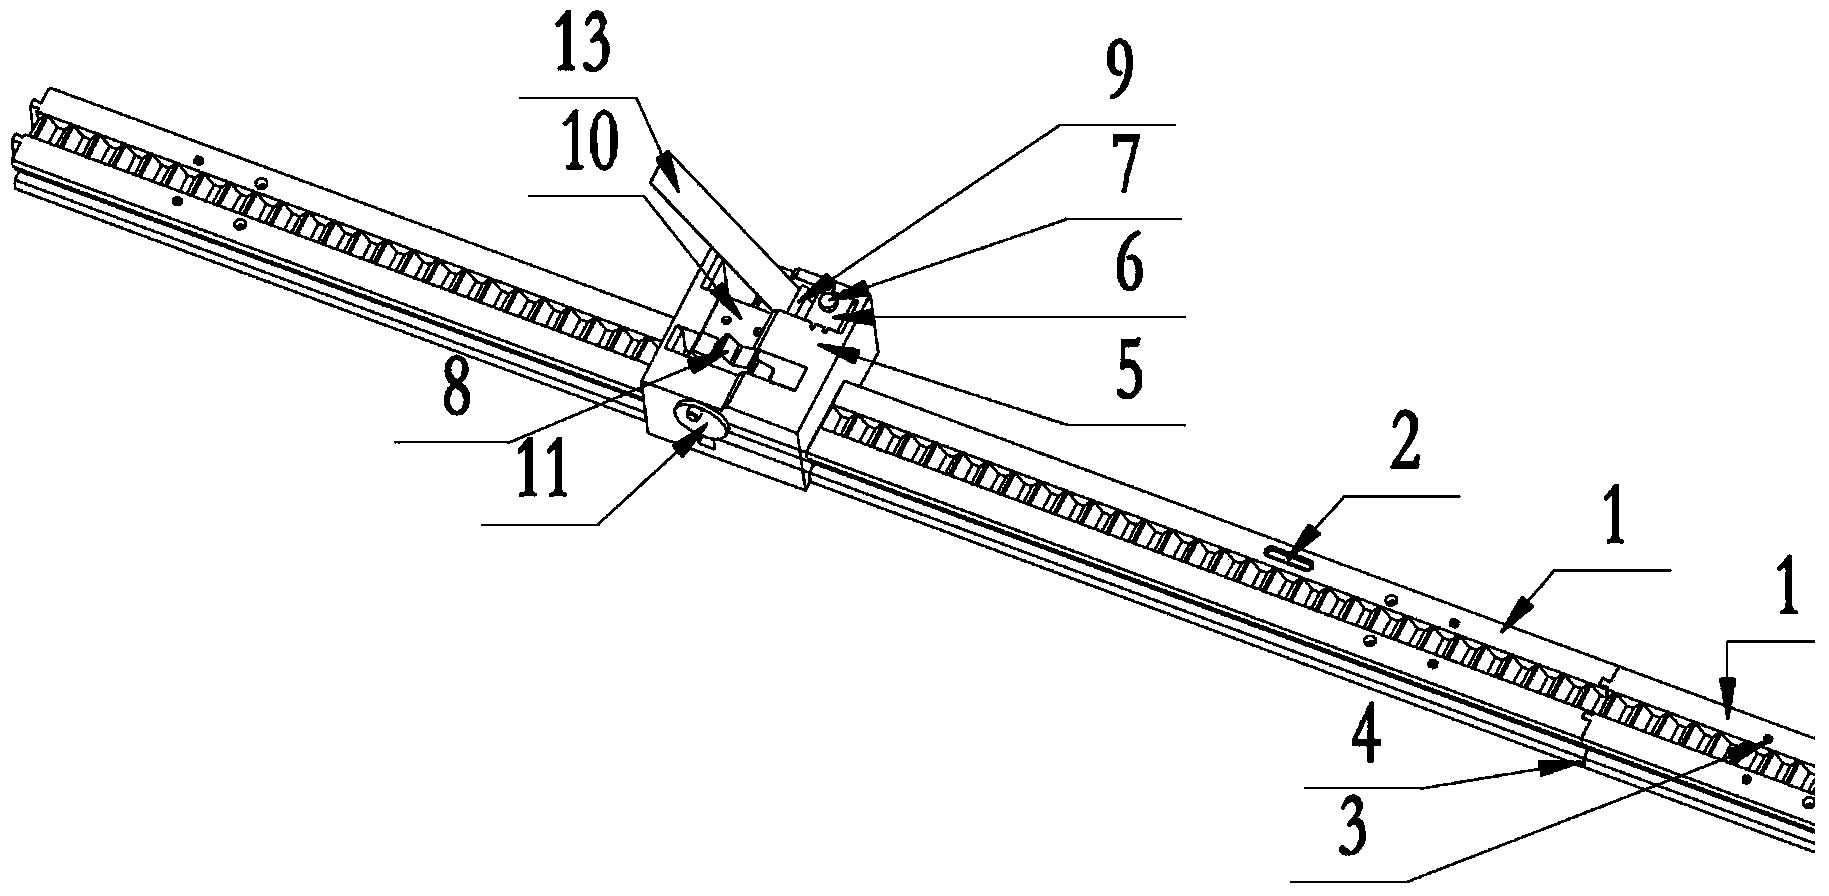 Grating ruler mounting tool capable being elongated